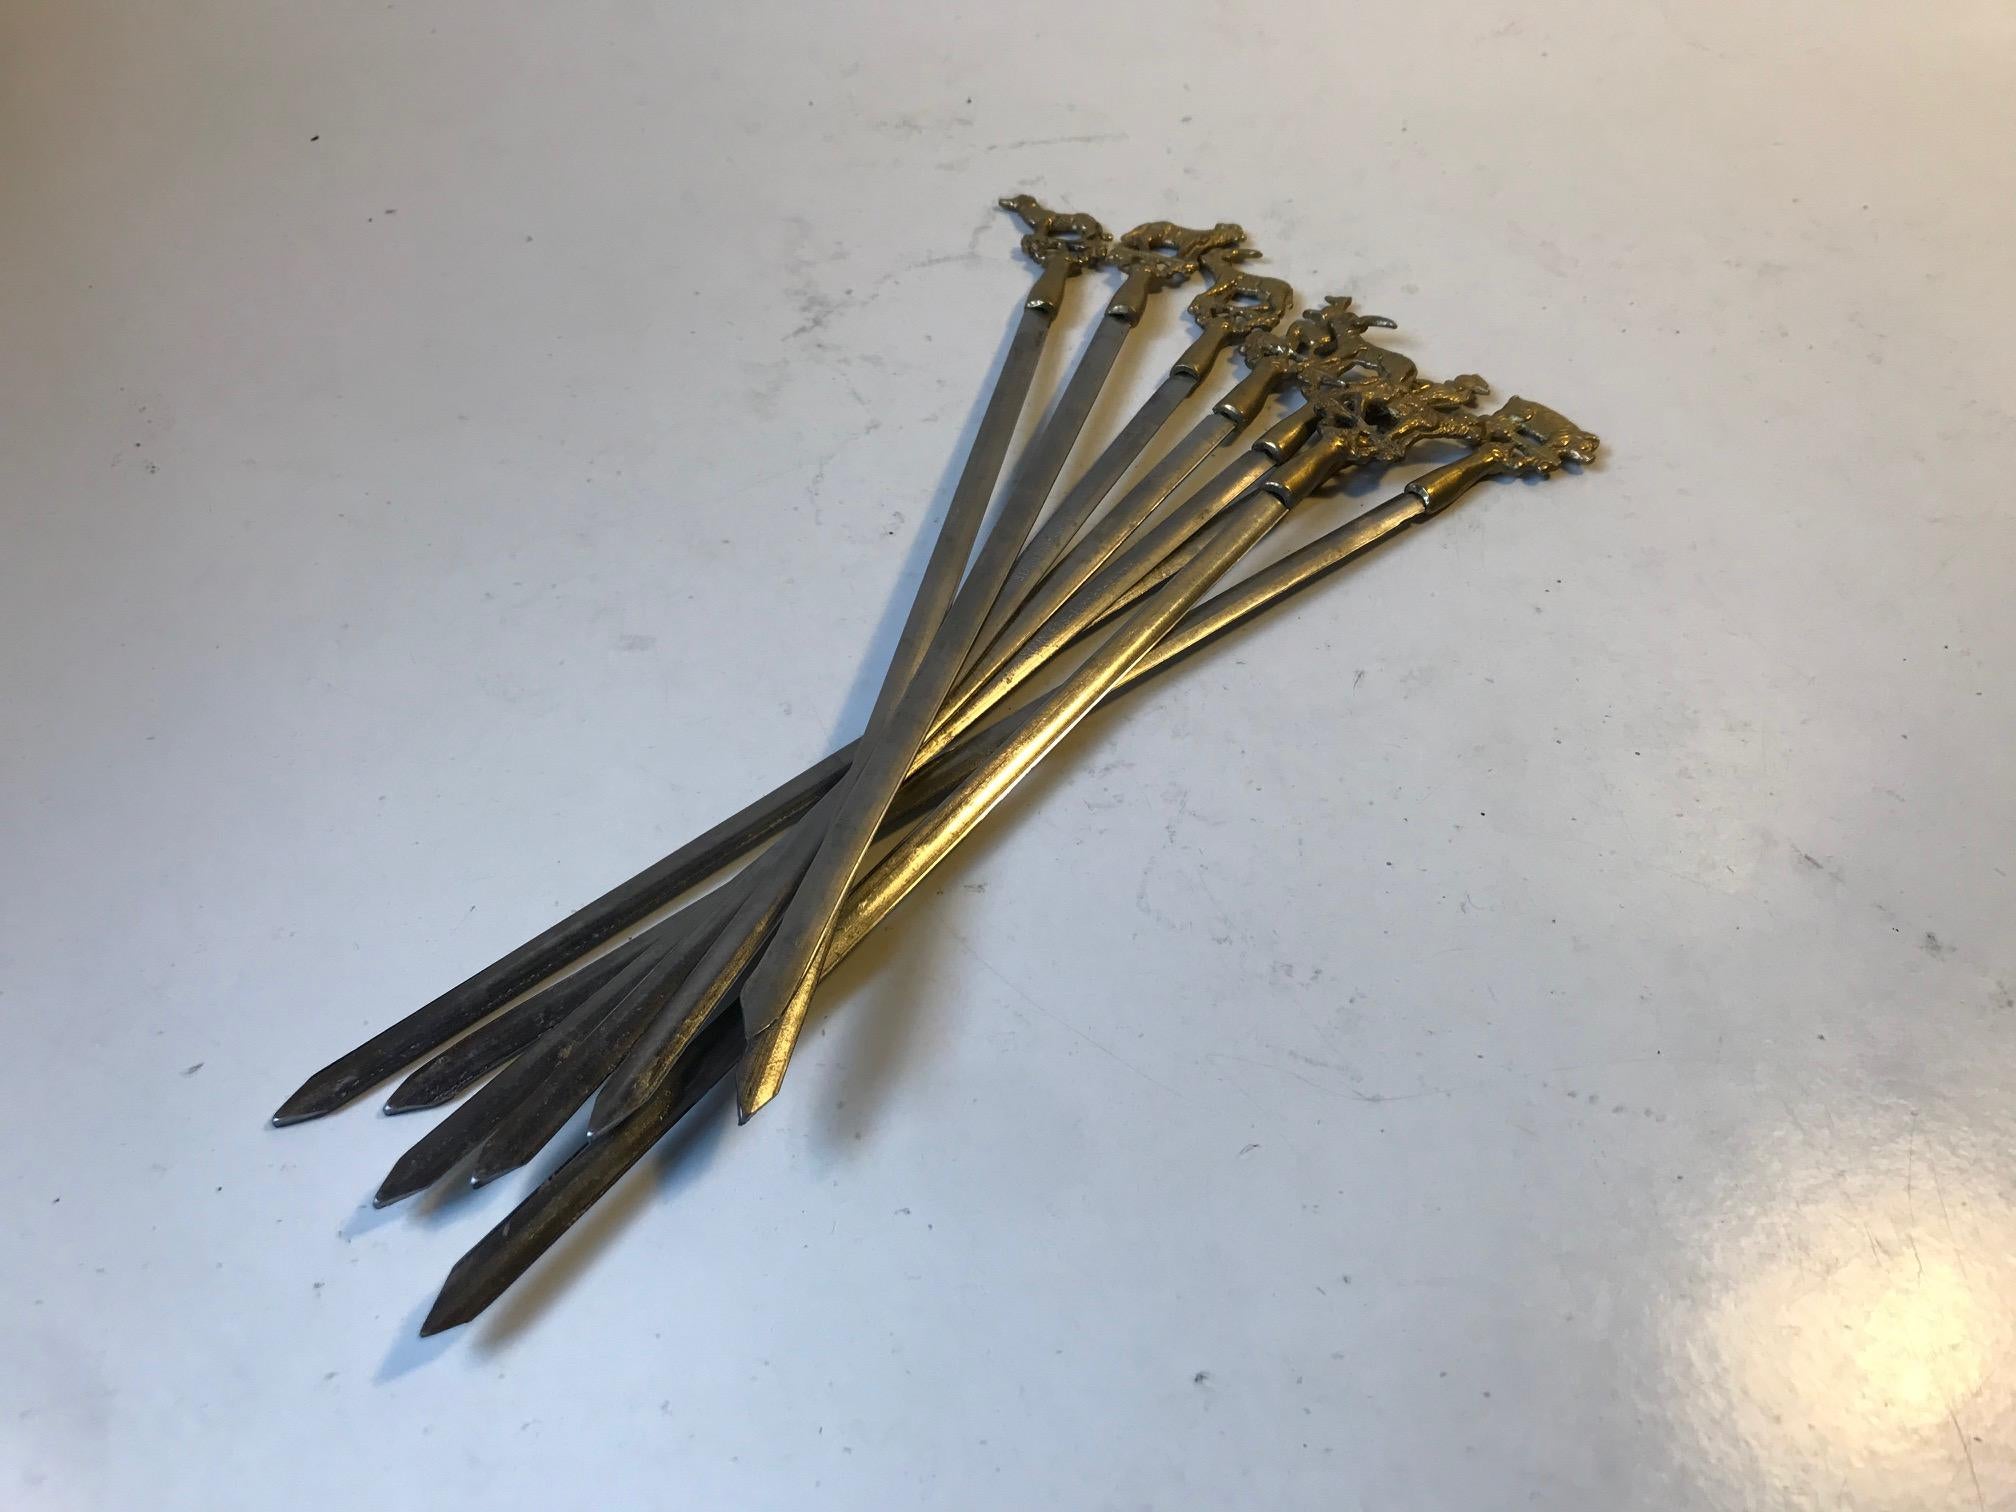 A set of 8 original Turkish sis kebab skewers. Made from practical flat stainless steel topped with handles of ornamented animals in brass. This set was manufactured by Serer in Istanbul Turkey during the 1960s or 1970s. The length of the Skewers is